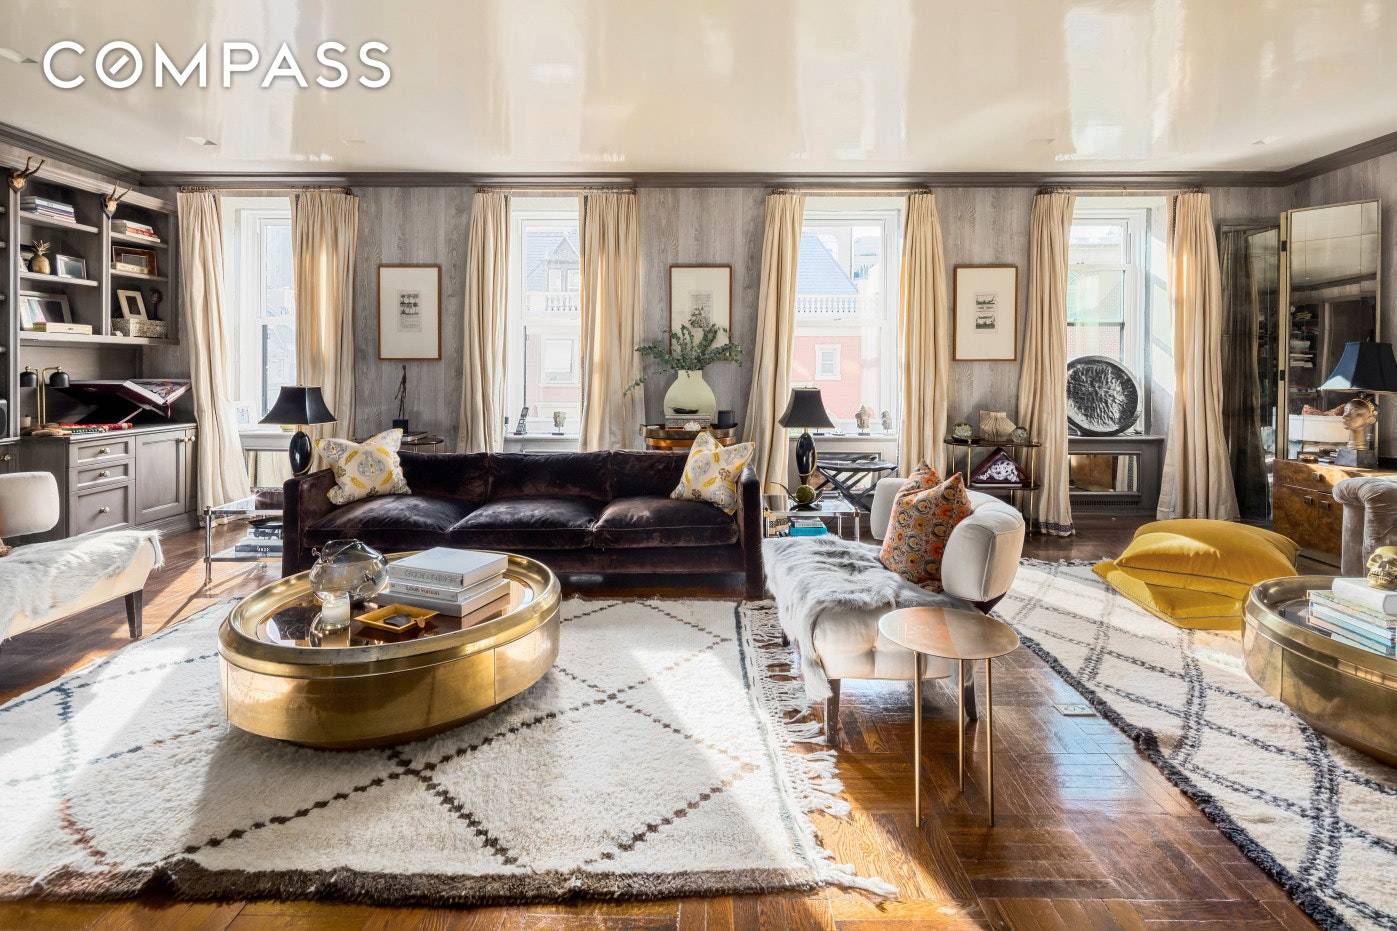 Classic pre war architecture meets contemporary design in this magnificent ten room, full floor residence in one of the Upper East Side s most sought after prewar cooperatives.